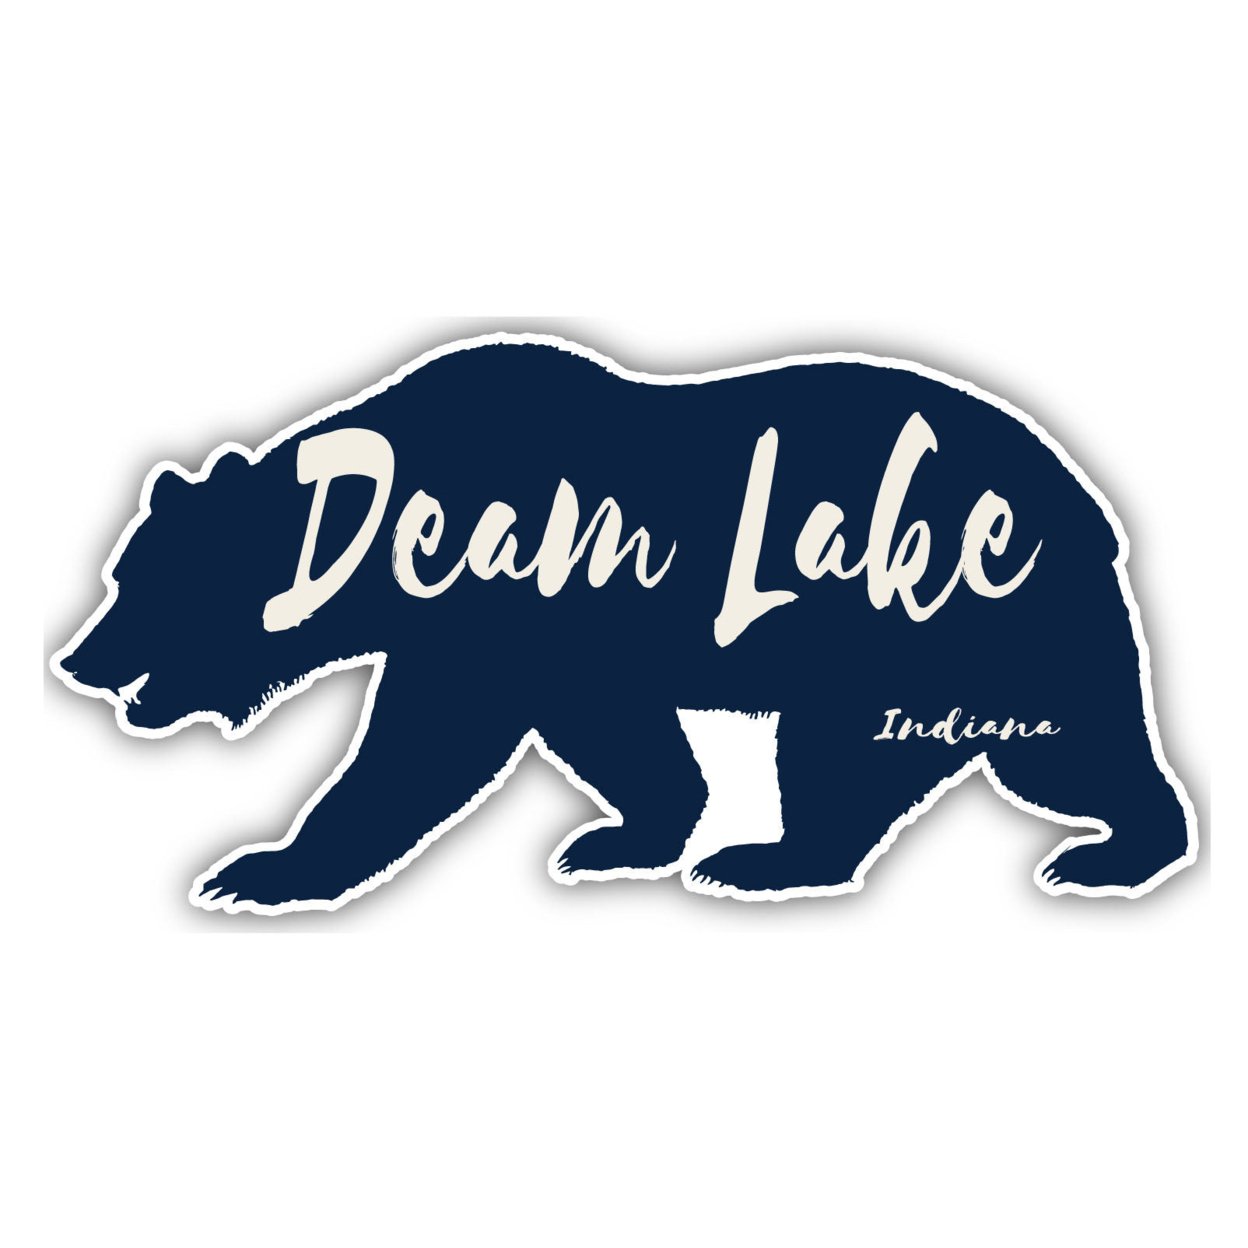 Deam Lake Indiana Souvenir Decorative Stickers (Choose Theme And Size) - 4-Pack, 8-Inch, Great Outdoors